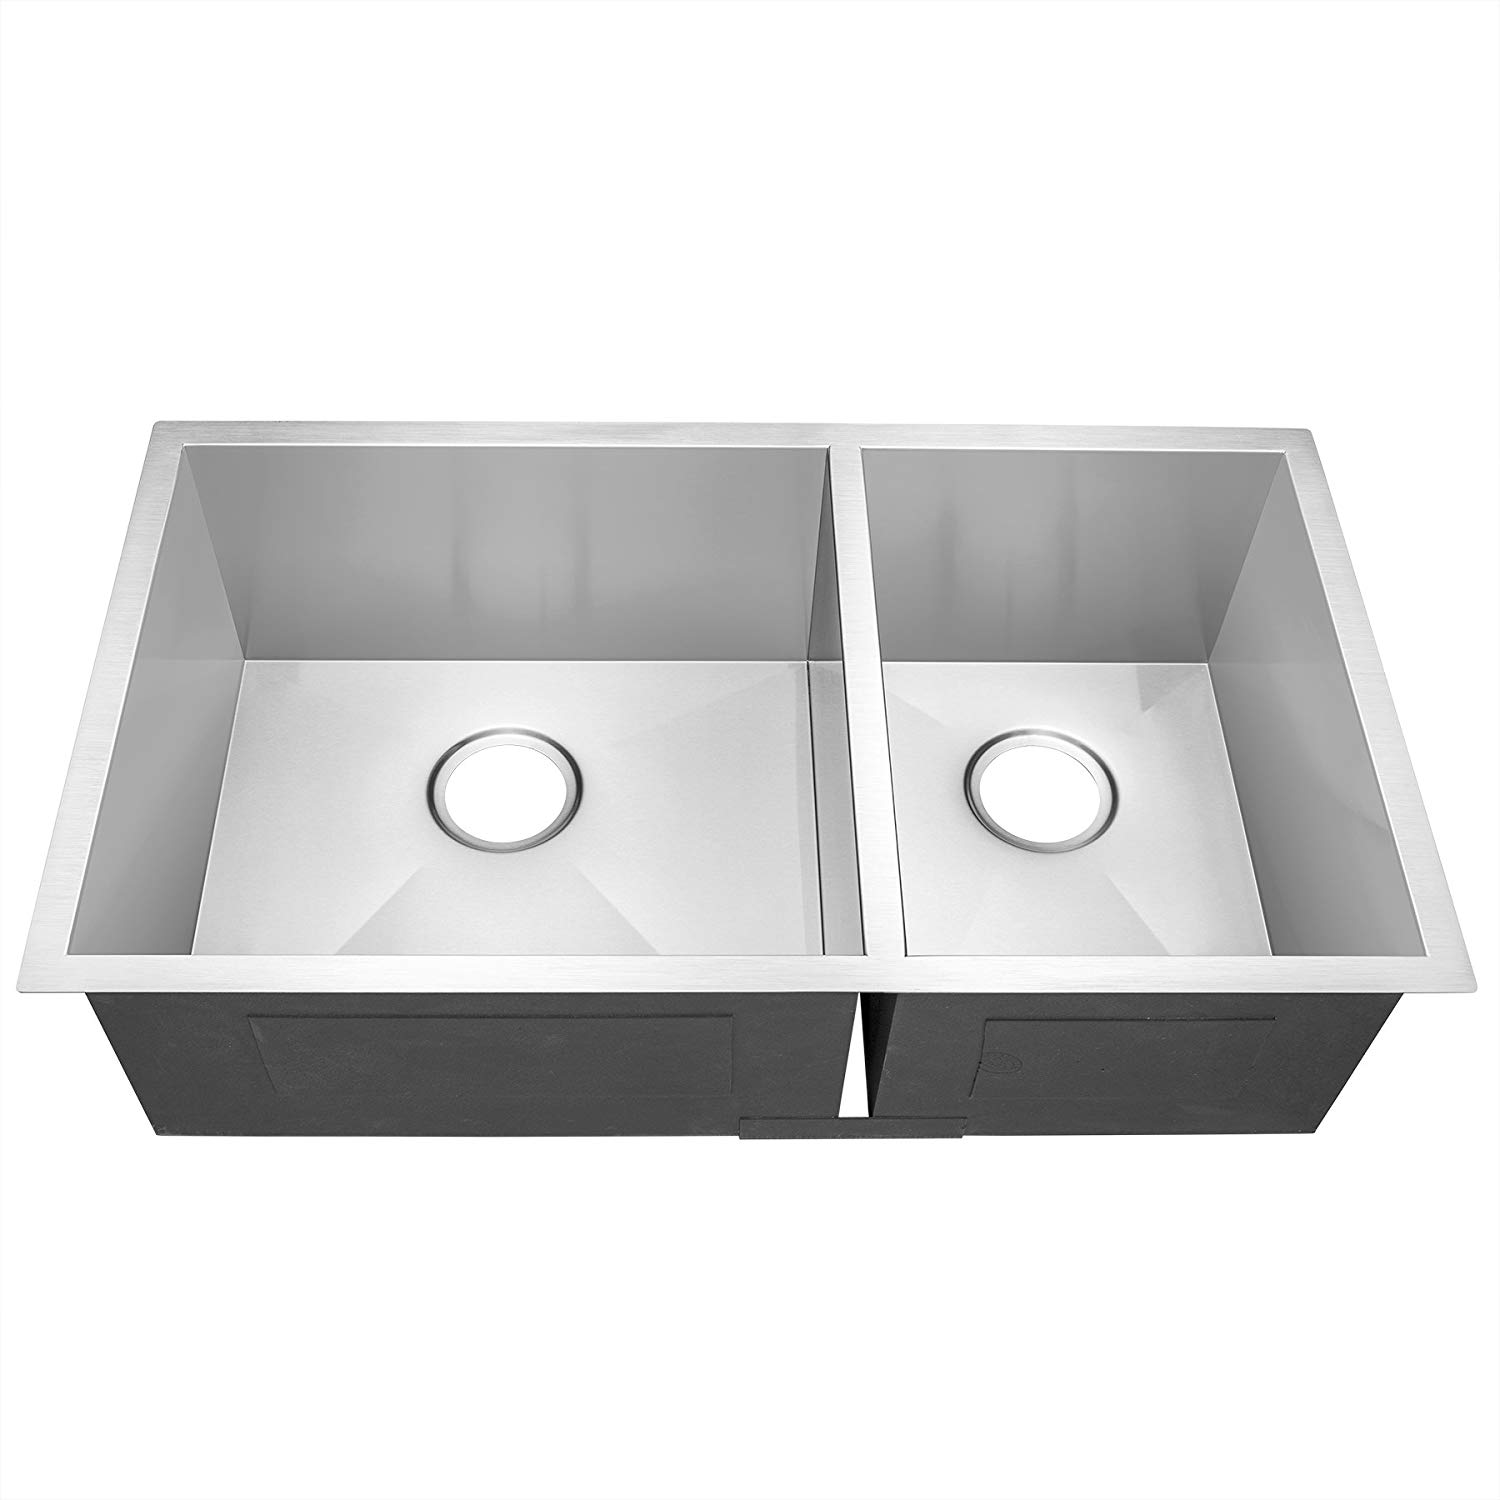 32 Inch Stainless Steel Handmade Undermount Kitchen Sink with Double Bowl